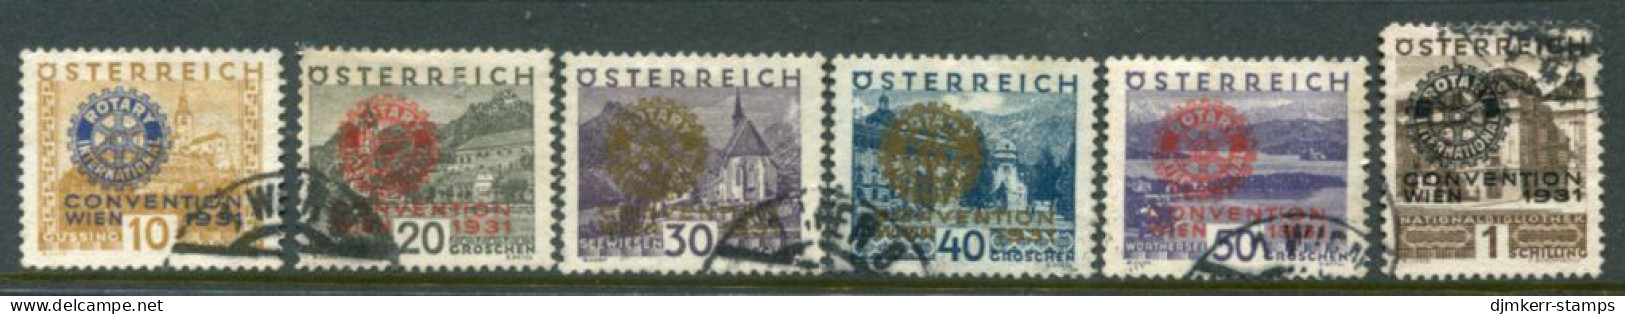 AUSTRIA 1931 Rotarian Congress Set Used. Michel 518-23 - Used Stamps